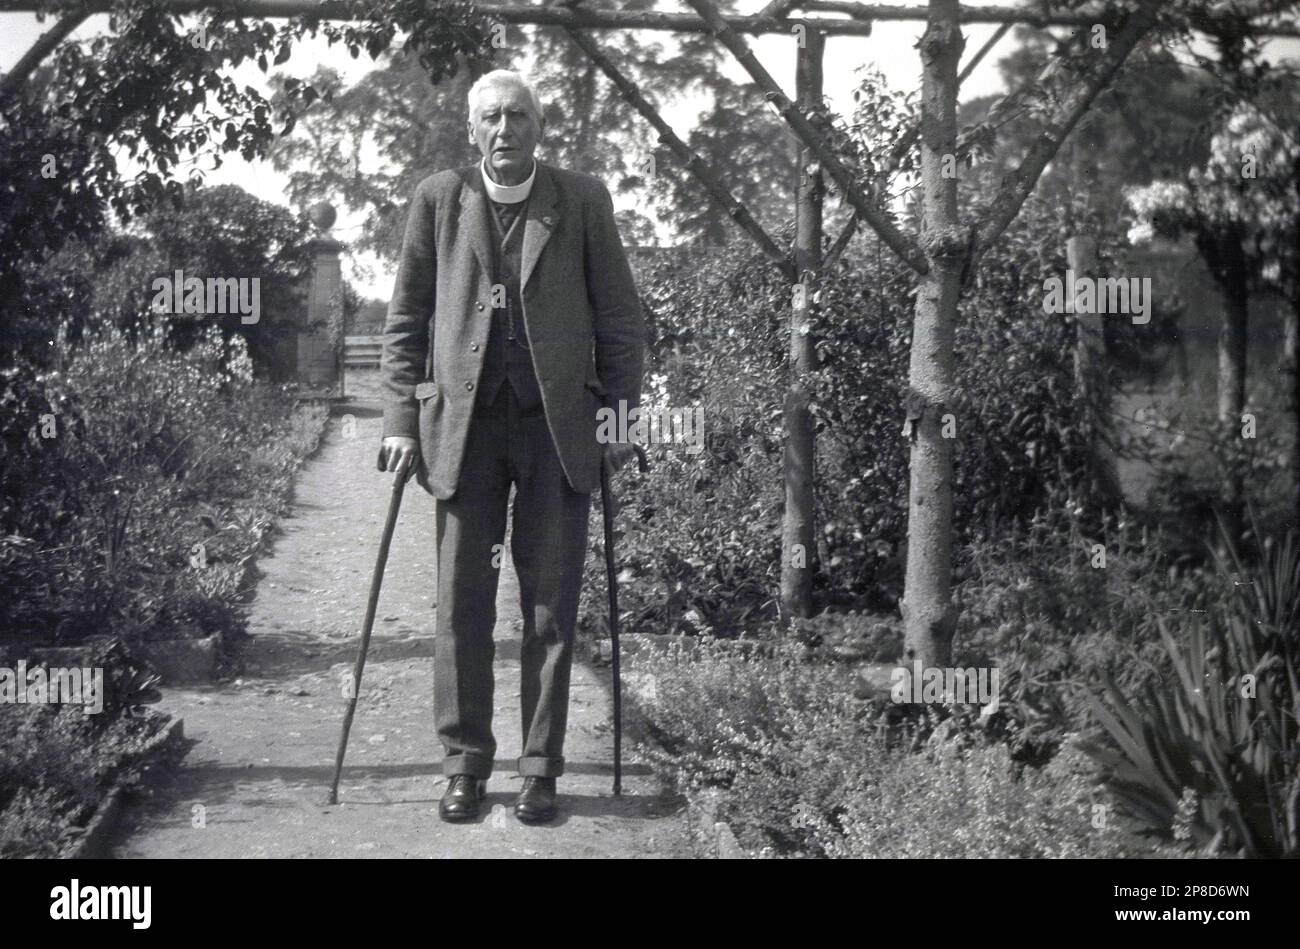 circa 1930s, historical, an elderly English vicar wearing a woollen three-piece suit and clerical collar, walking through a path in a garden with the aid of two walking sticks, one in each hand, England, UK. The wearing of a religious collar is a sign of the priest's availability, an identifying badge that can be recognised by people of all faiths and the permanent nature of Holy Orders. Stock Photo